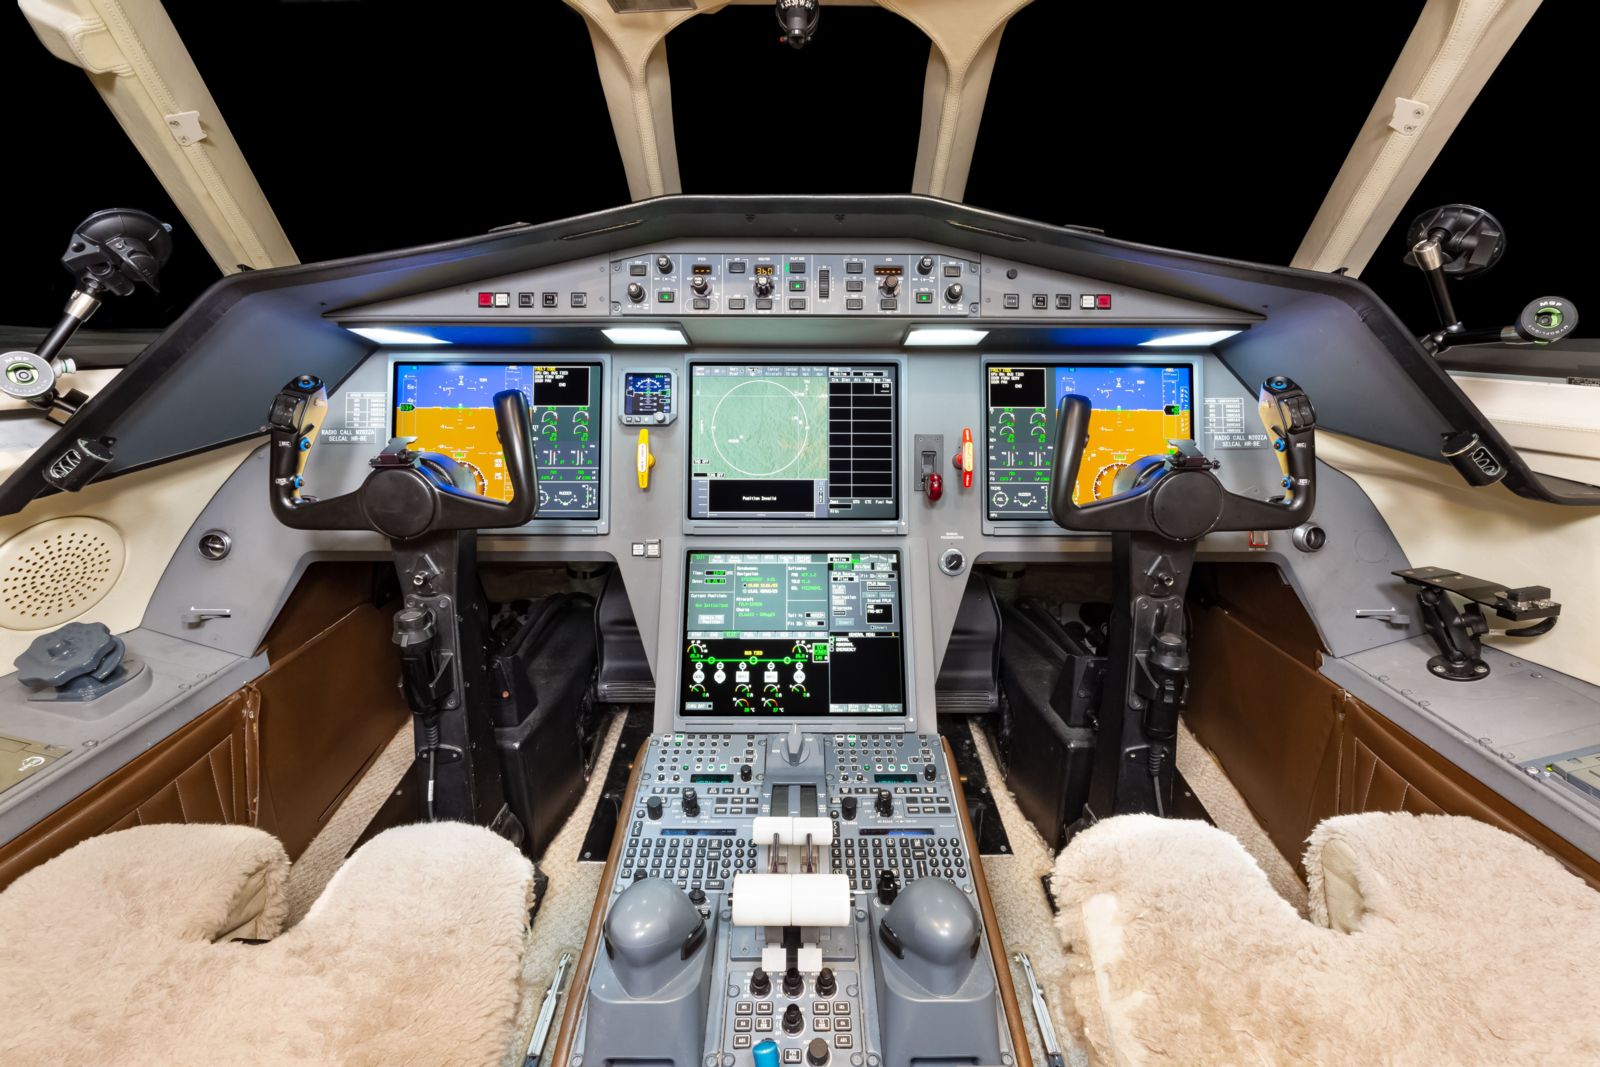 Dassault Falcon 2000LX  S/N 186 for sale | gallery image: /userfiles/files/specs/F2000LX/cockpit.jpeg